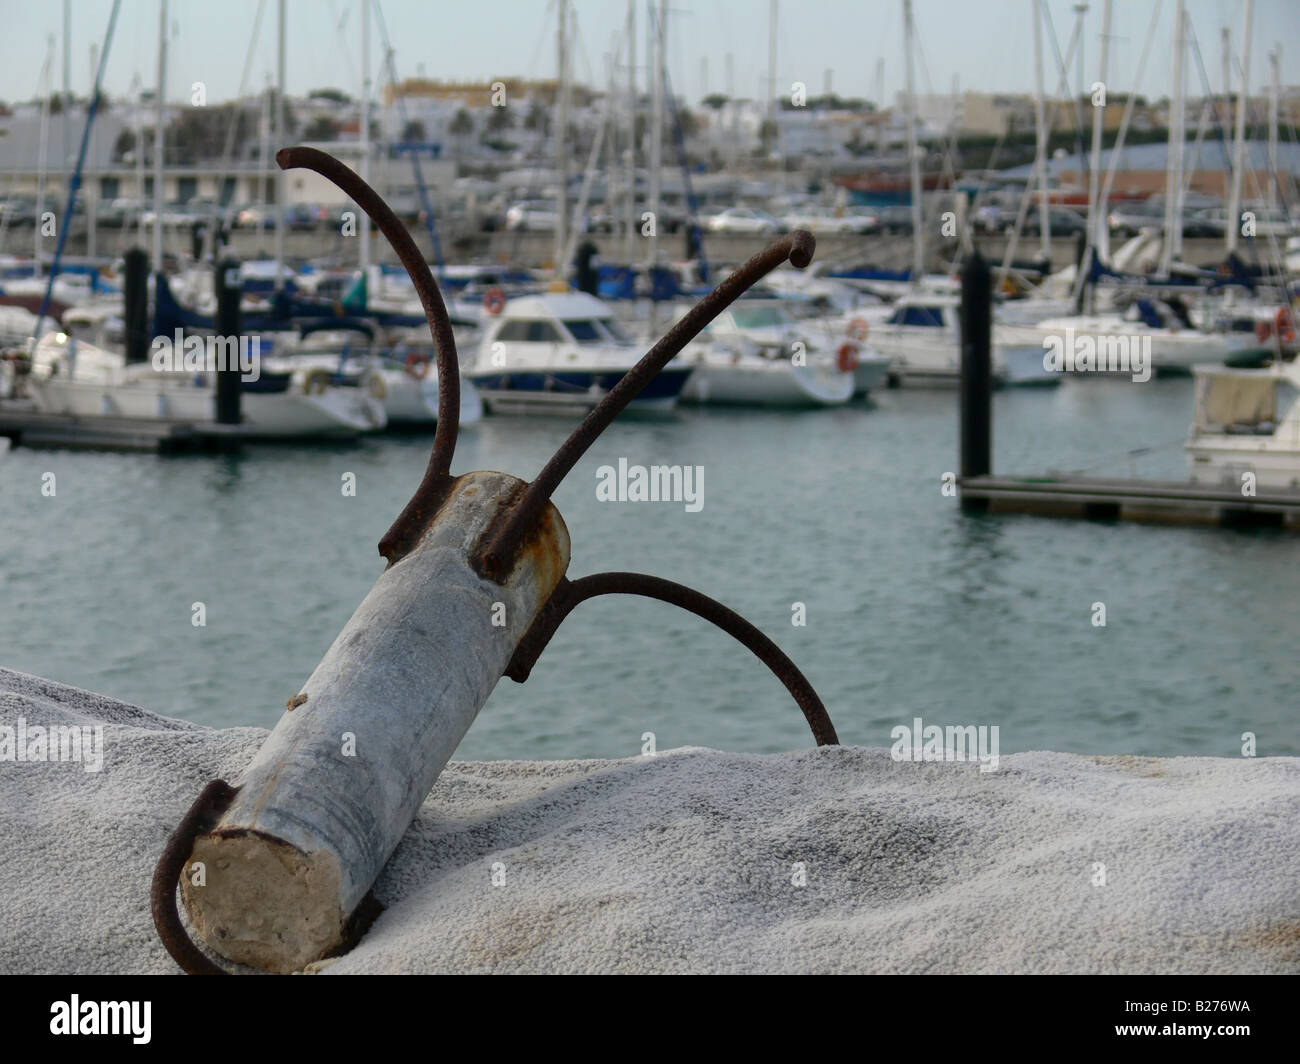 A picture of a rusty anchor Stock Photo